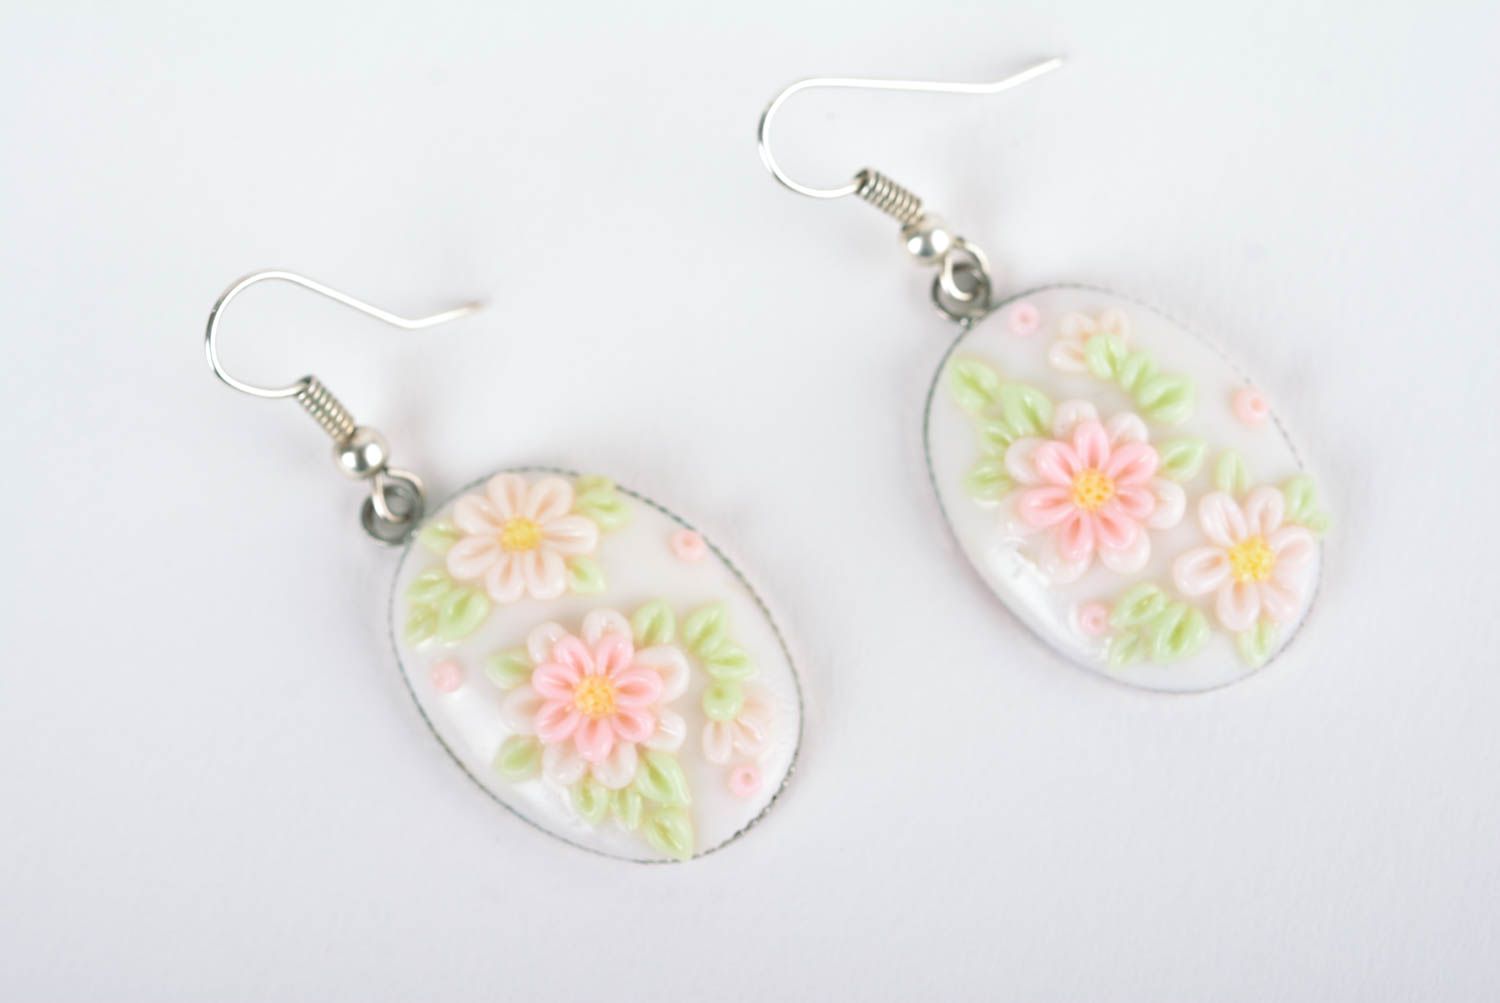 Handmade plastic earrings polymer clay jewelry fashion accessories for women photo 1